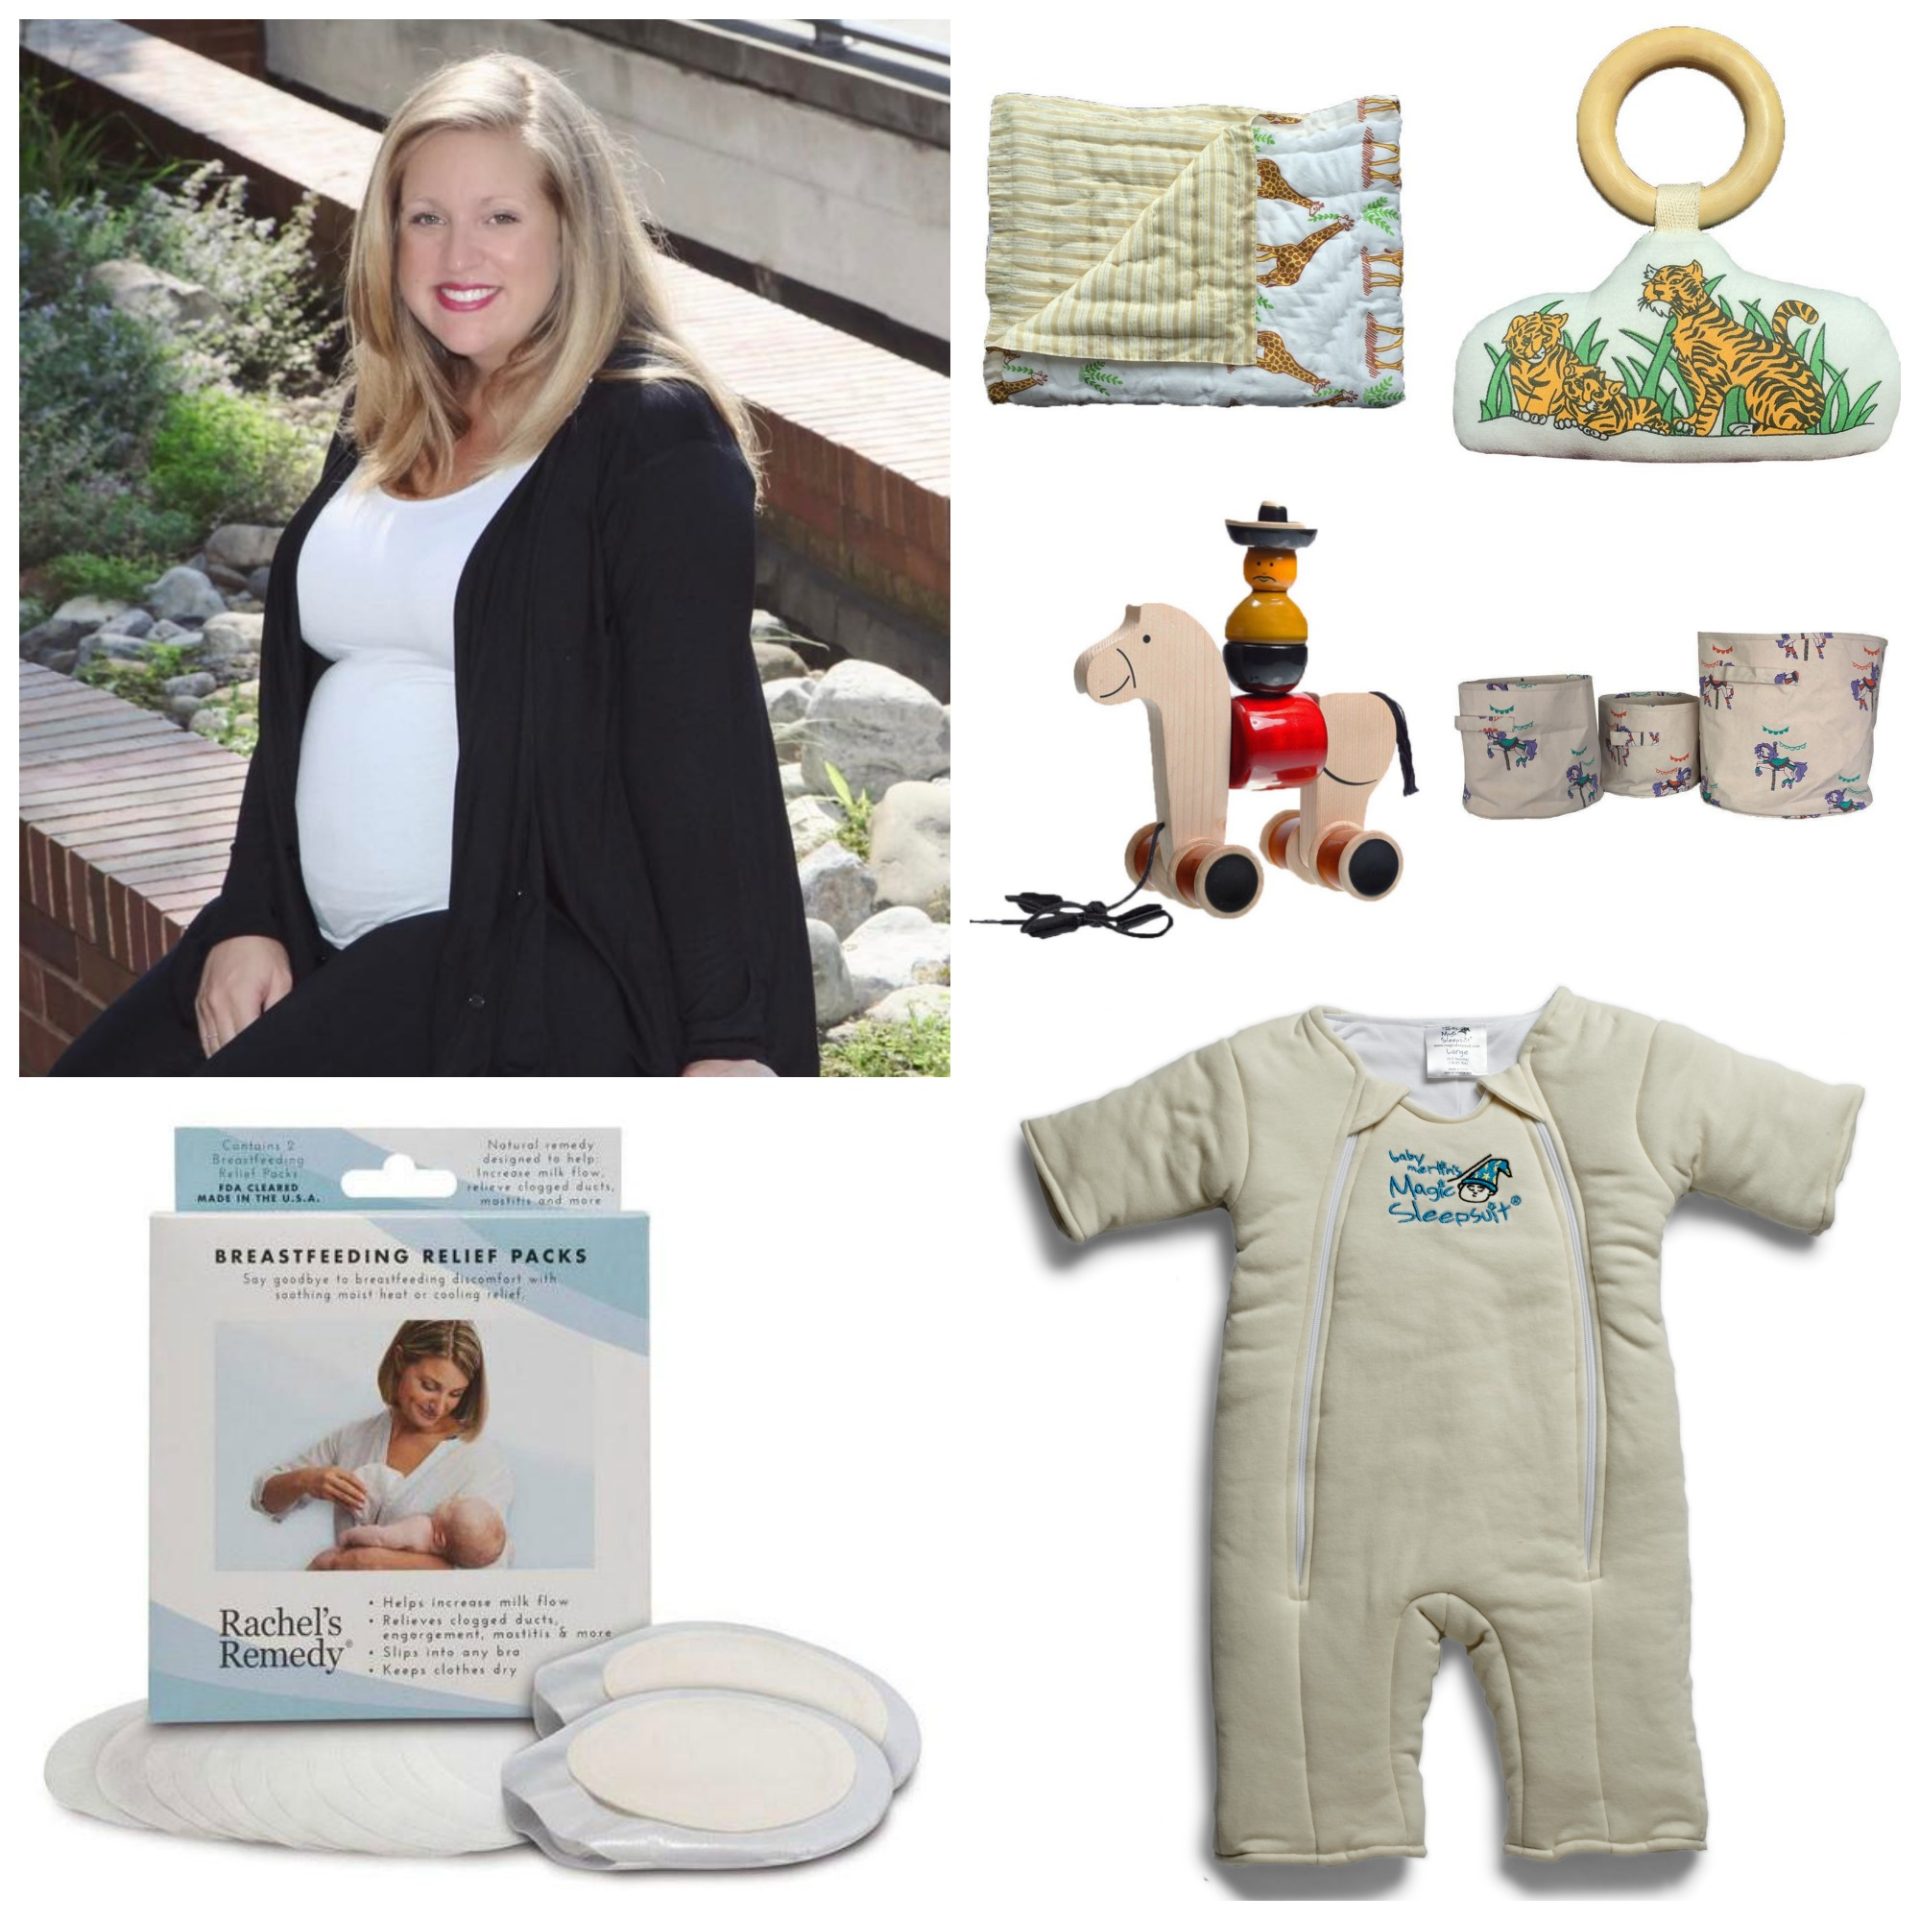 Unique and Wonderful Baby Shower Gifts!